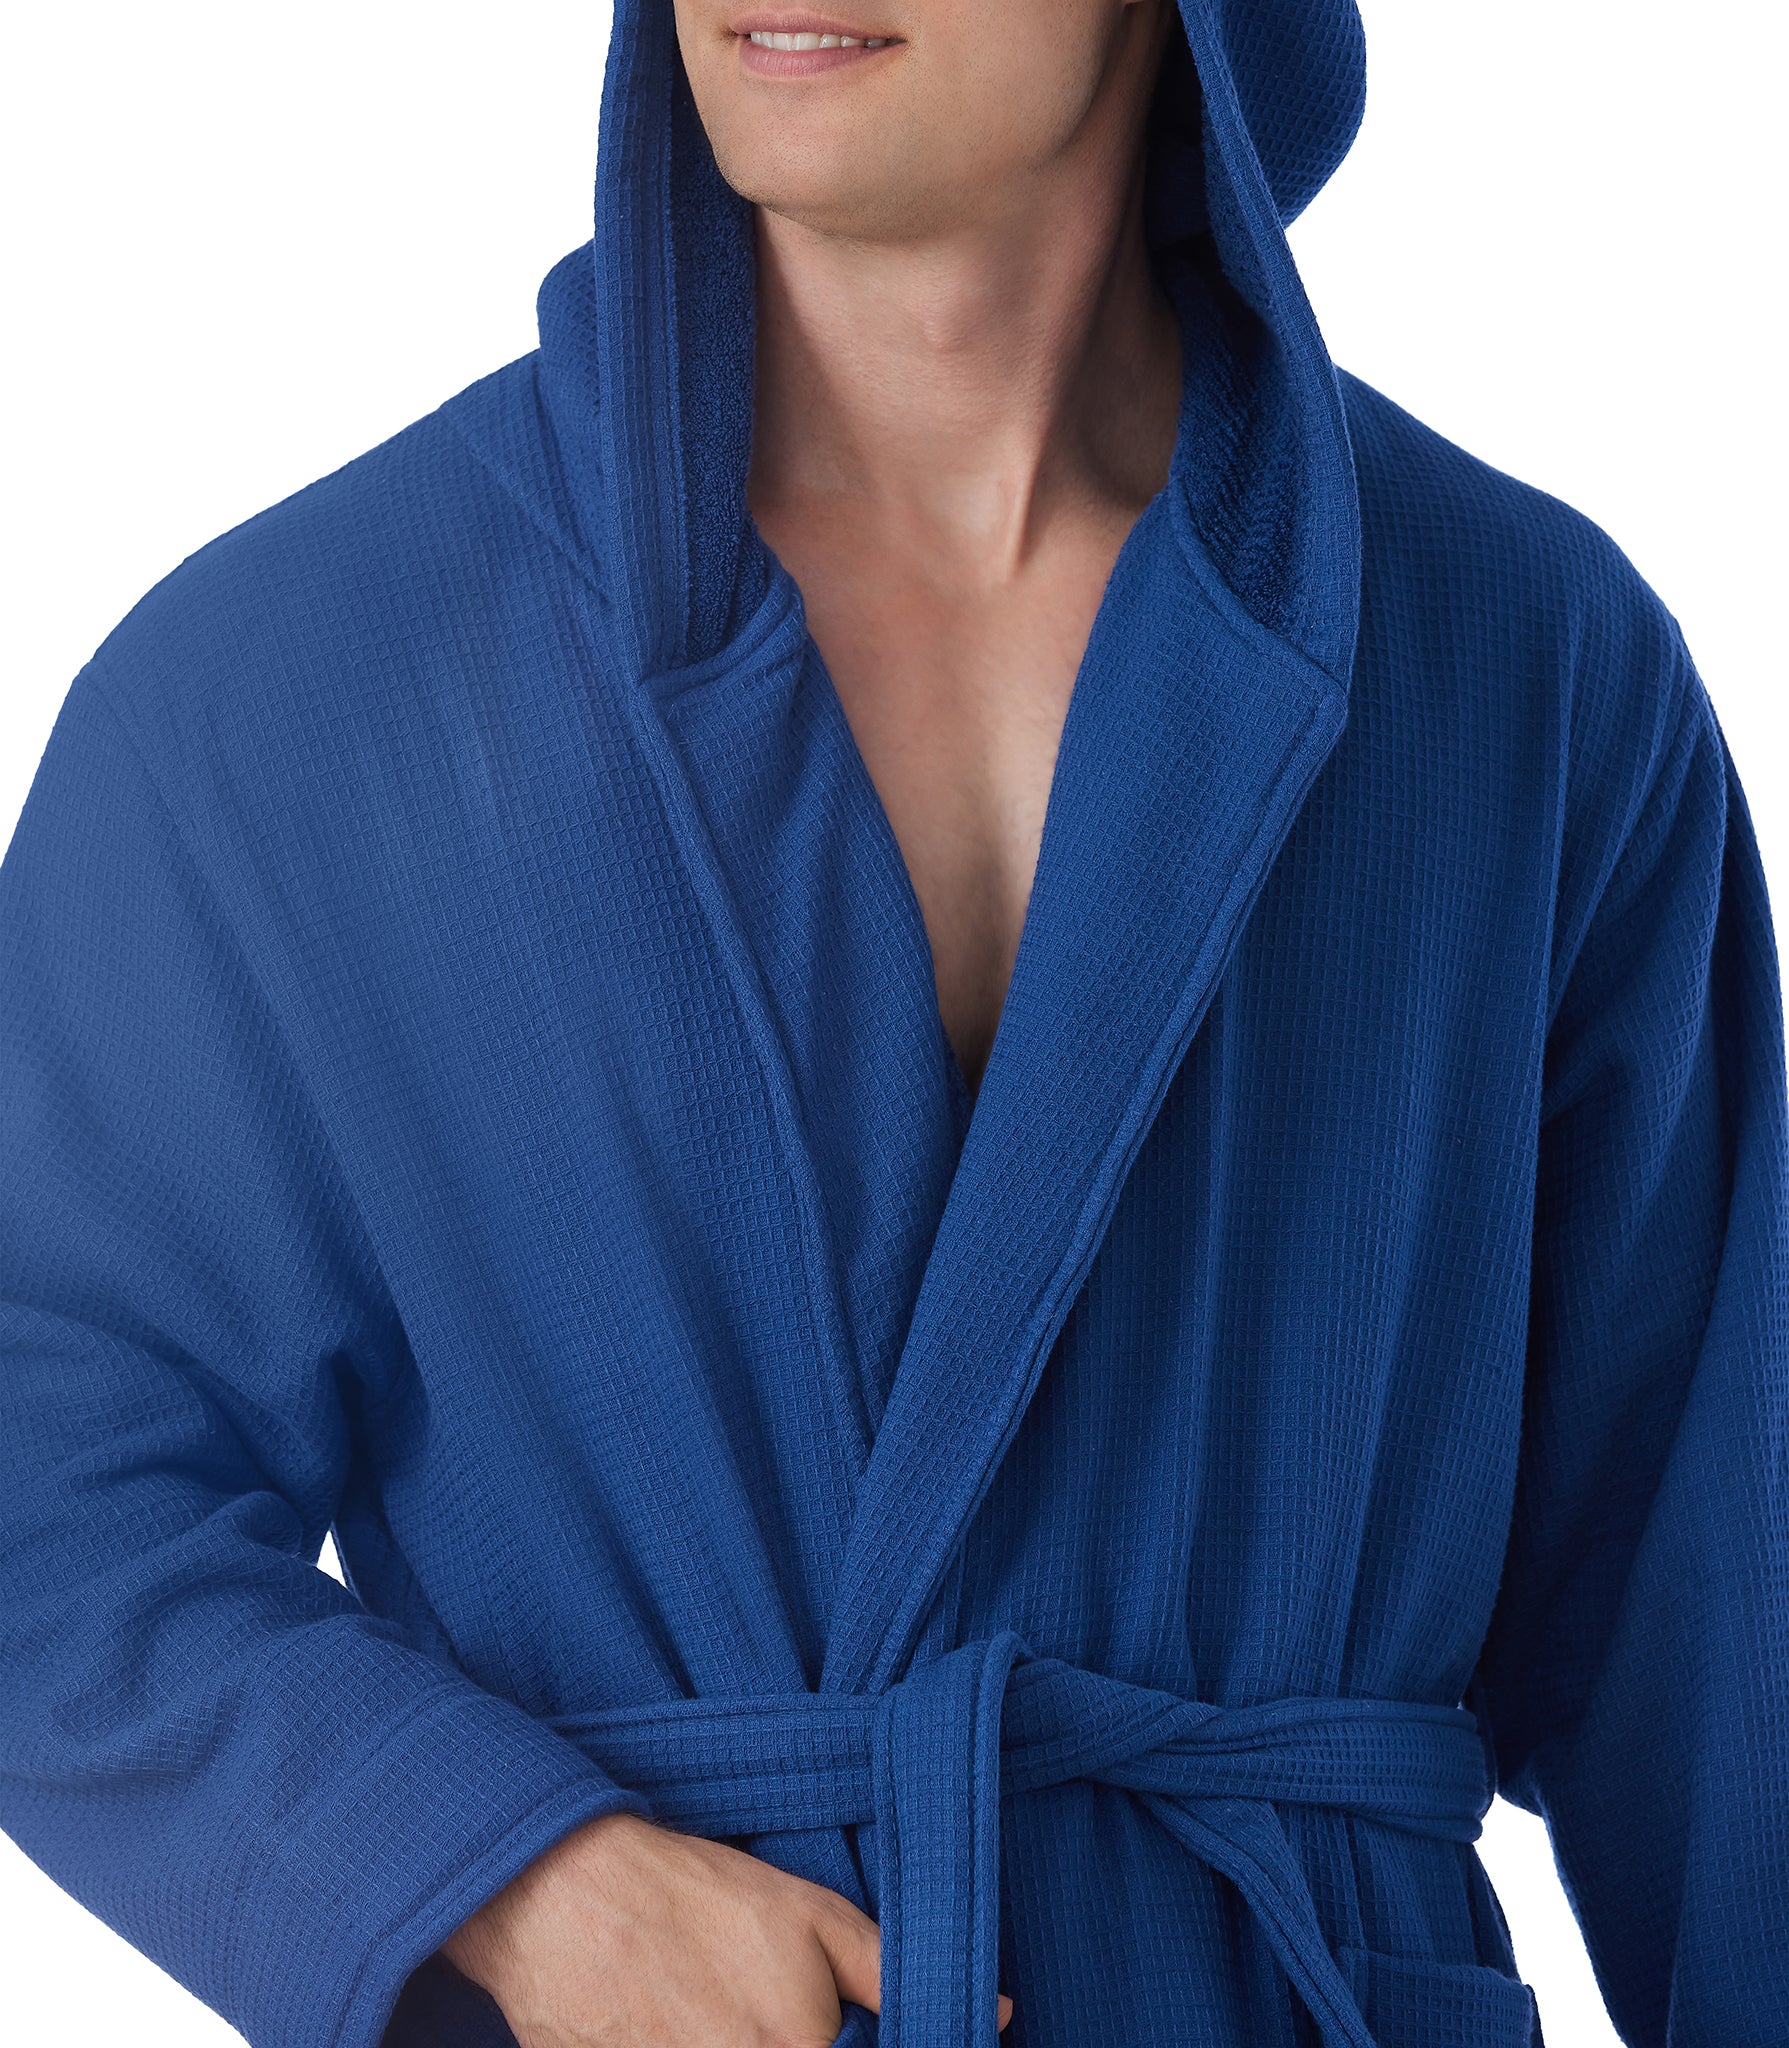 Men's Robes: How Do You Choose a Men's Robe That’s Comfortable For Different Seasons?